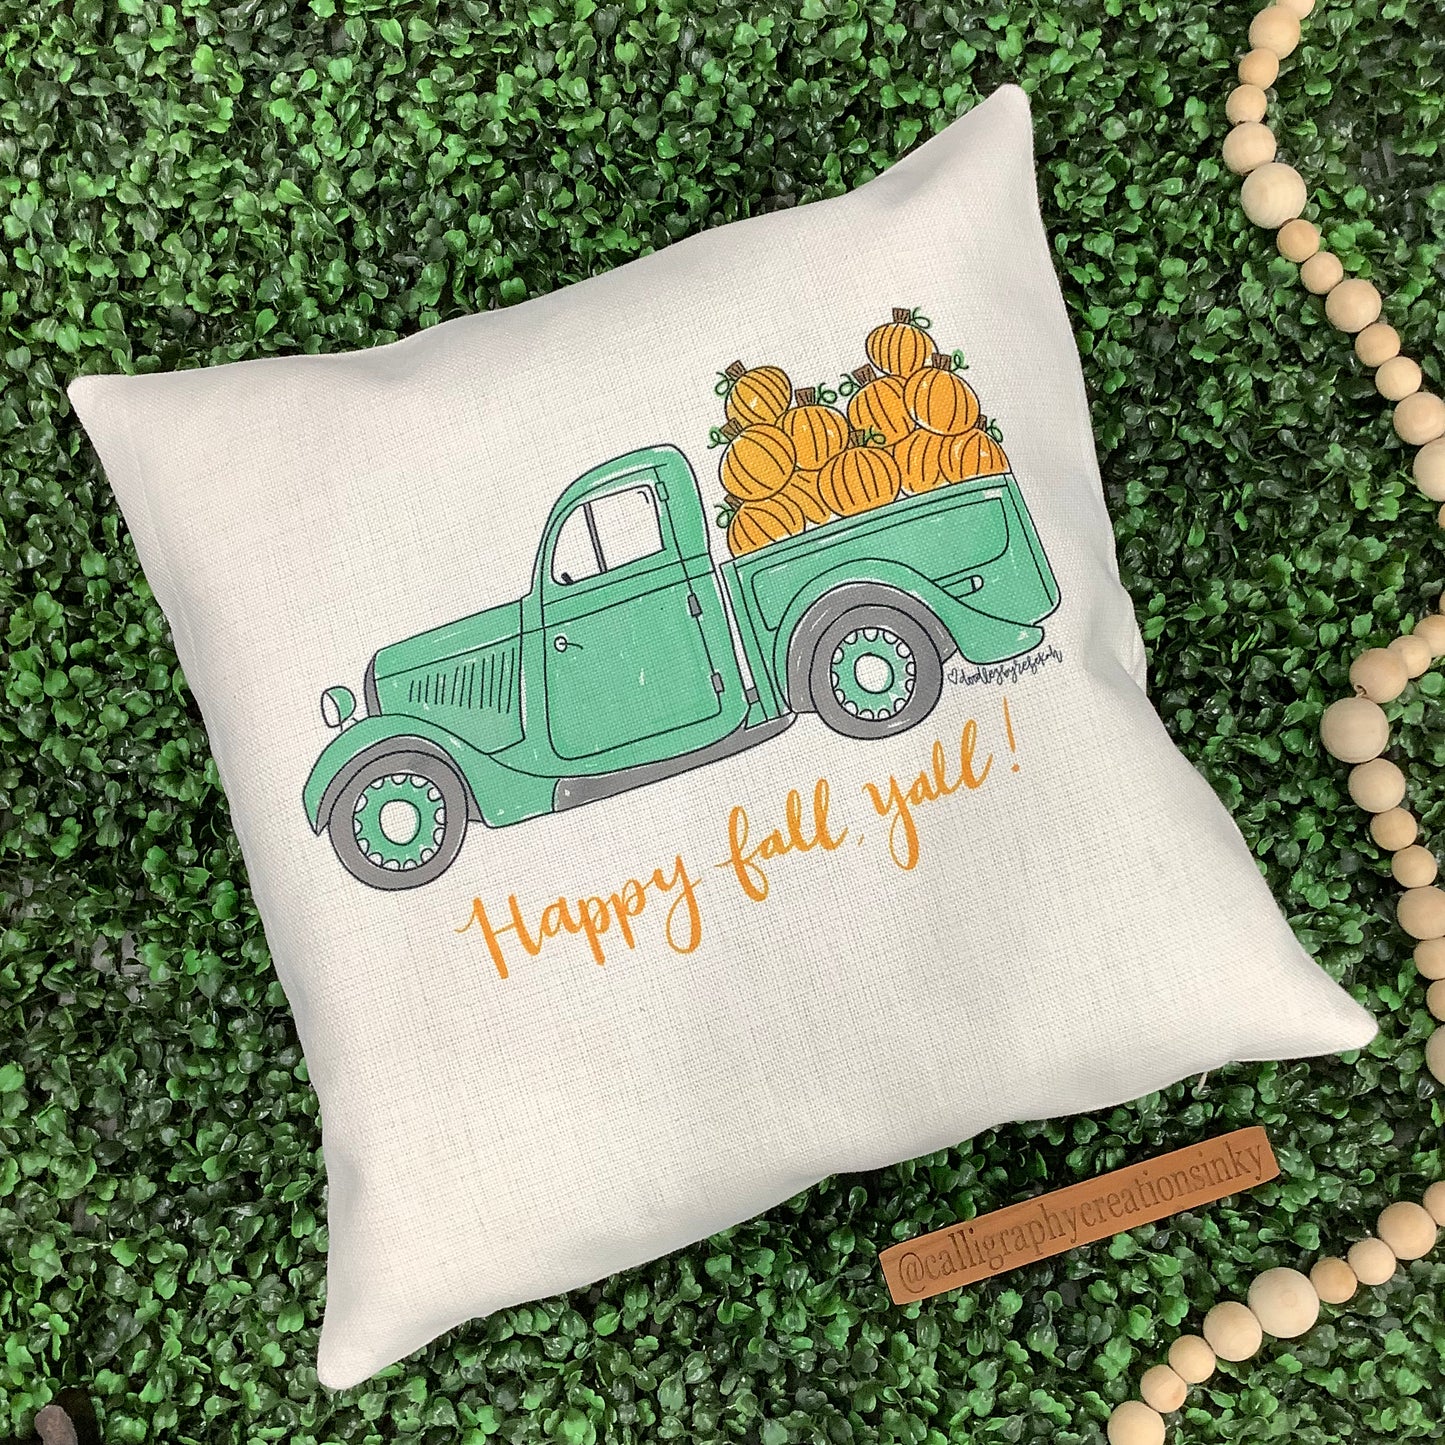 Happy Fall Y’all Truck Pillow